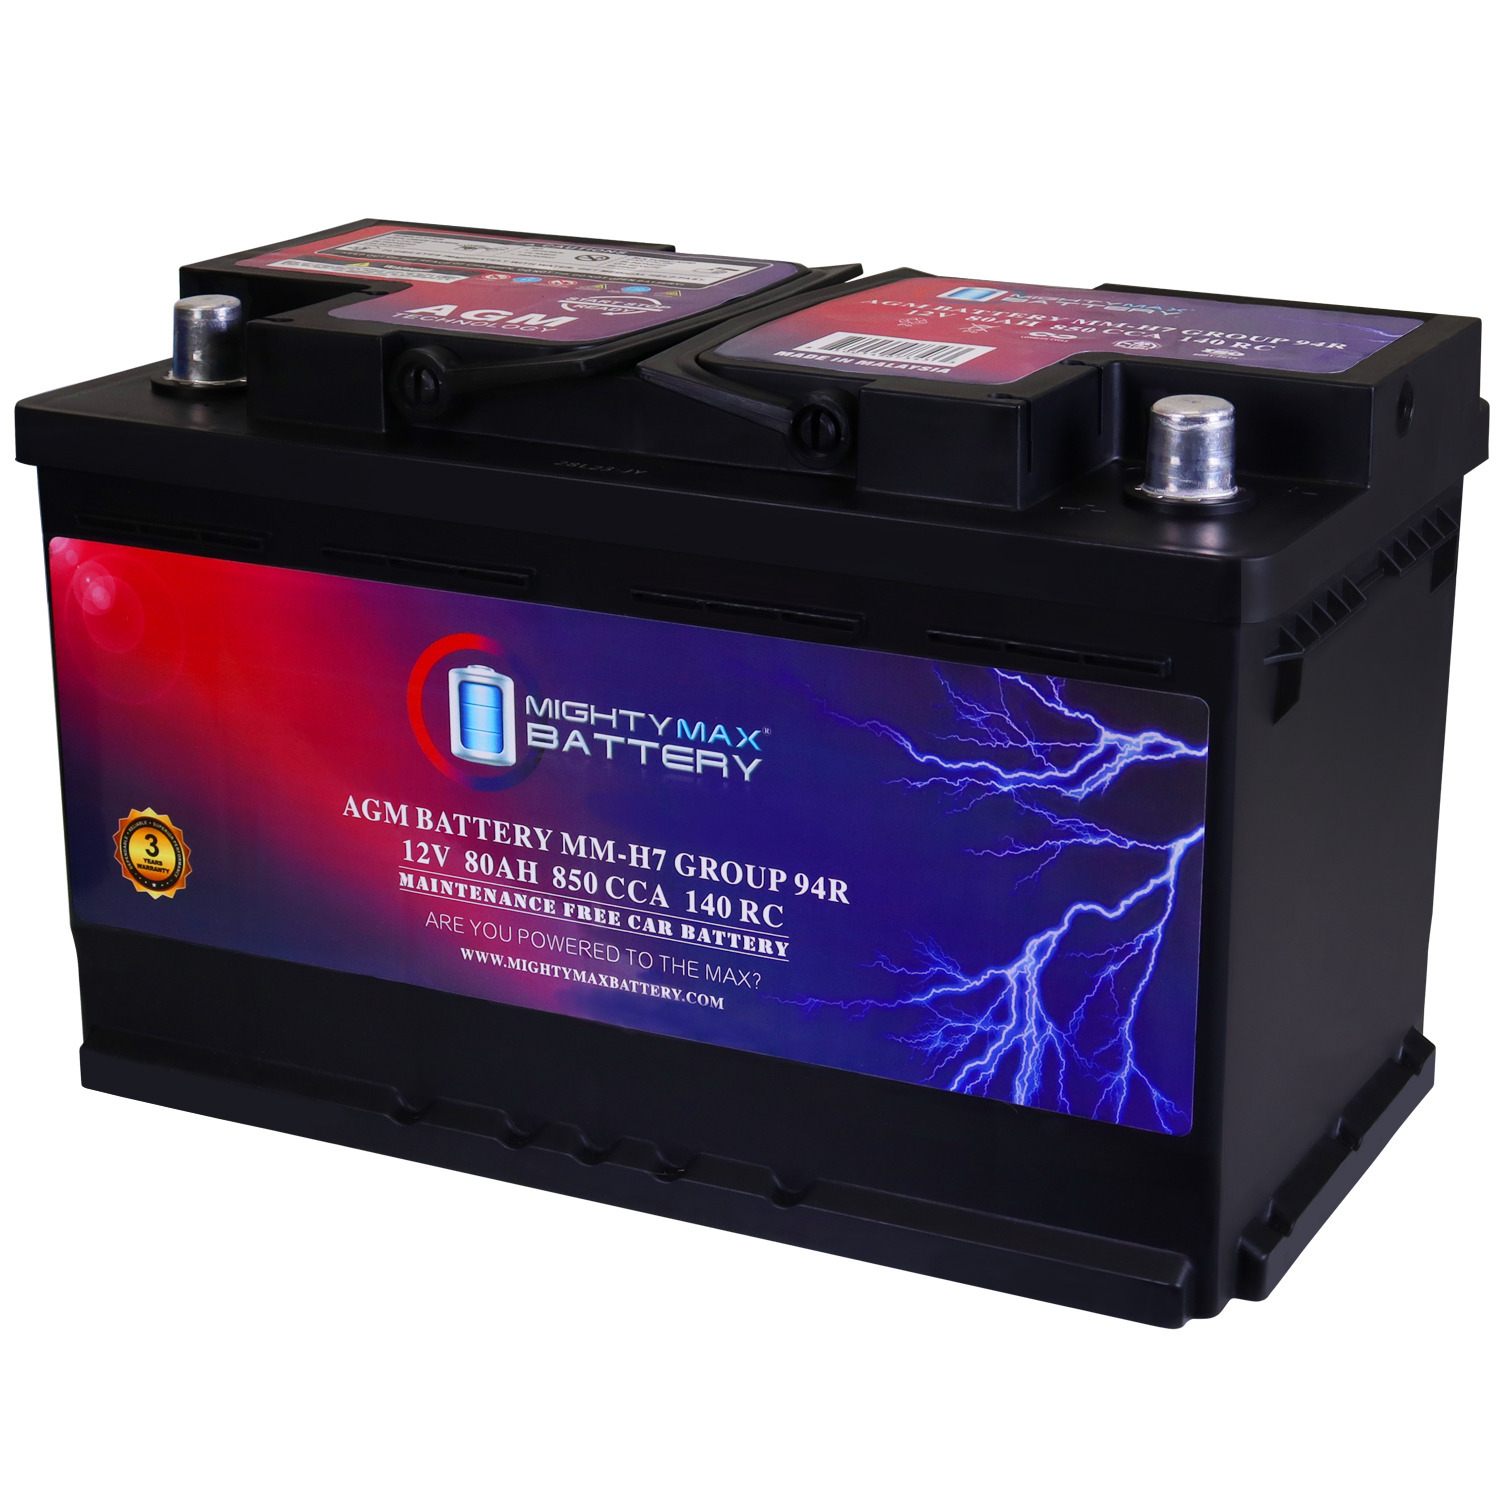 MM-H7 Group 94R 12V 80AH 140RC 850 CCA Replacement Battery Compatible with Chevrolet Silverado 2500HD 3/4 Ton - Pickup 14-16